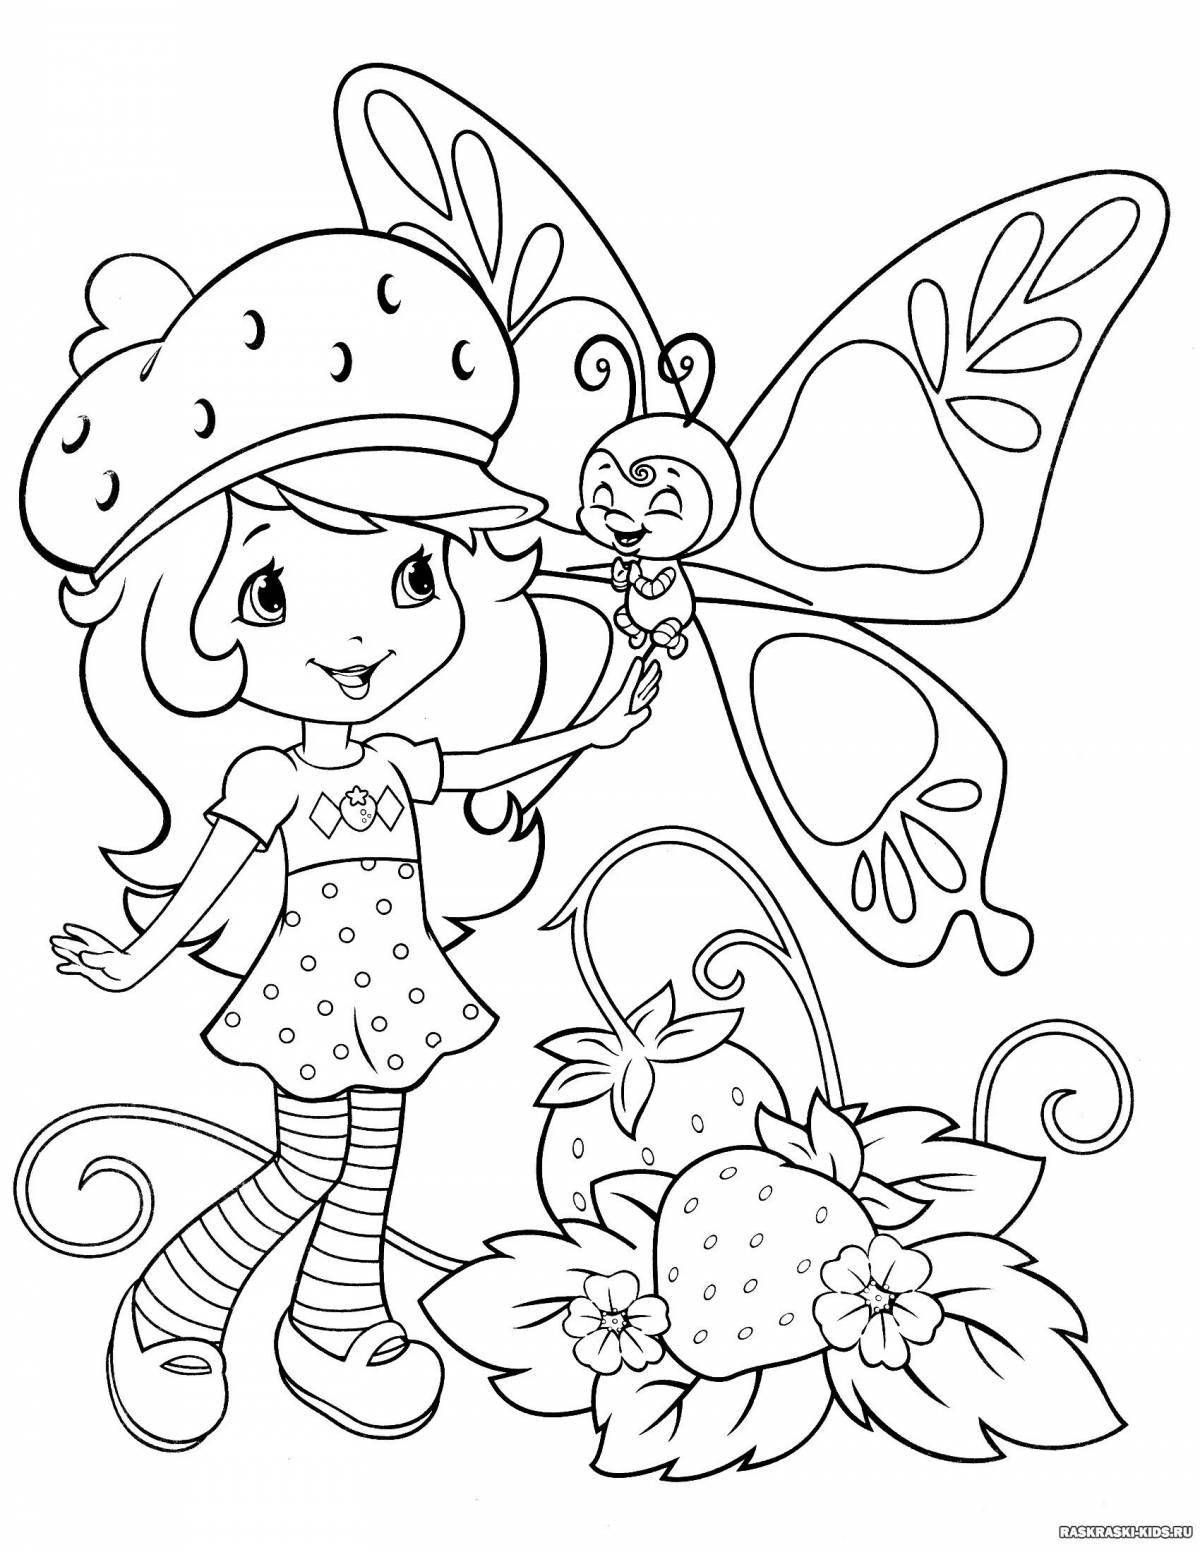 Delightful coloring for girls 6 years old